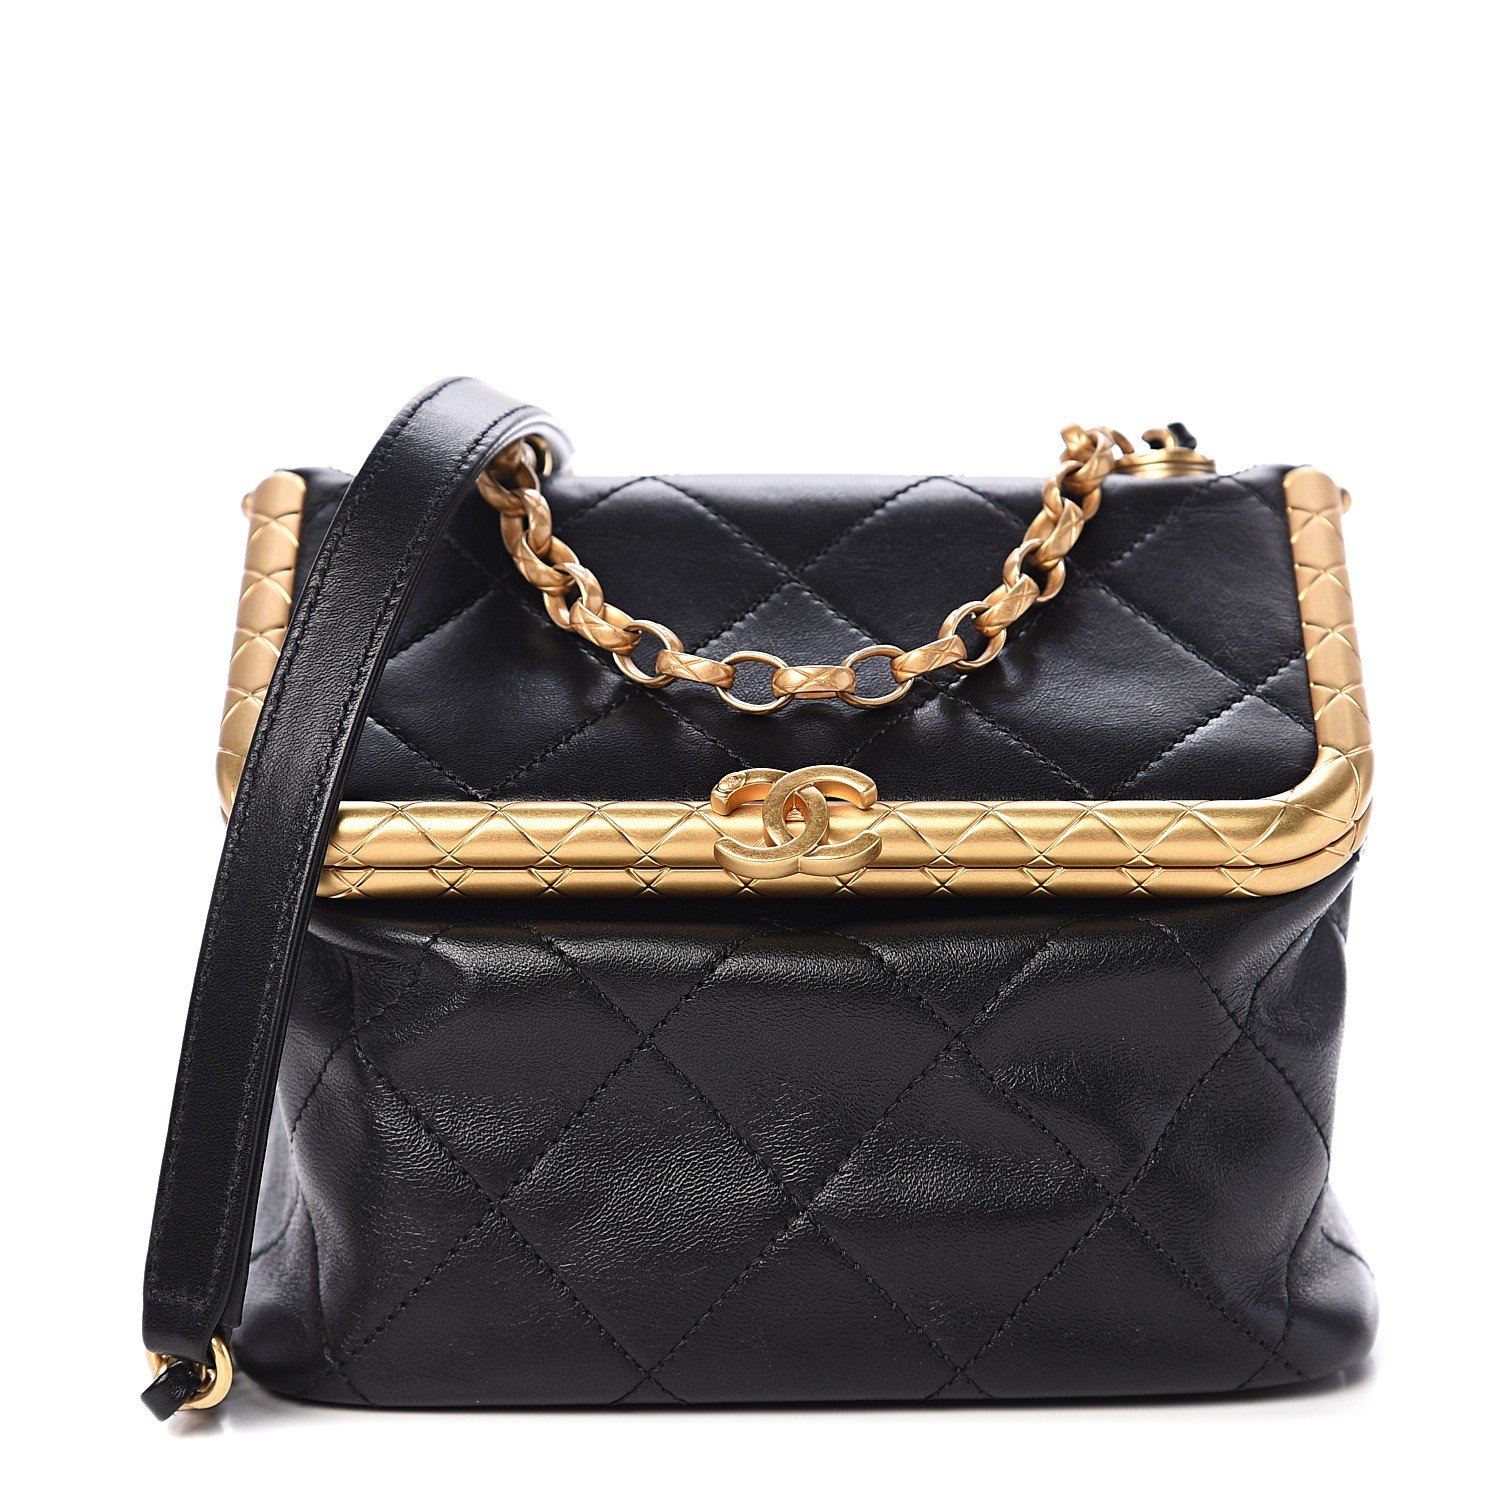 Chanel Quilted Kiss-Lock Bag in Black Lambskin & Gold-Tone Metal